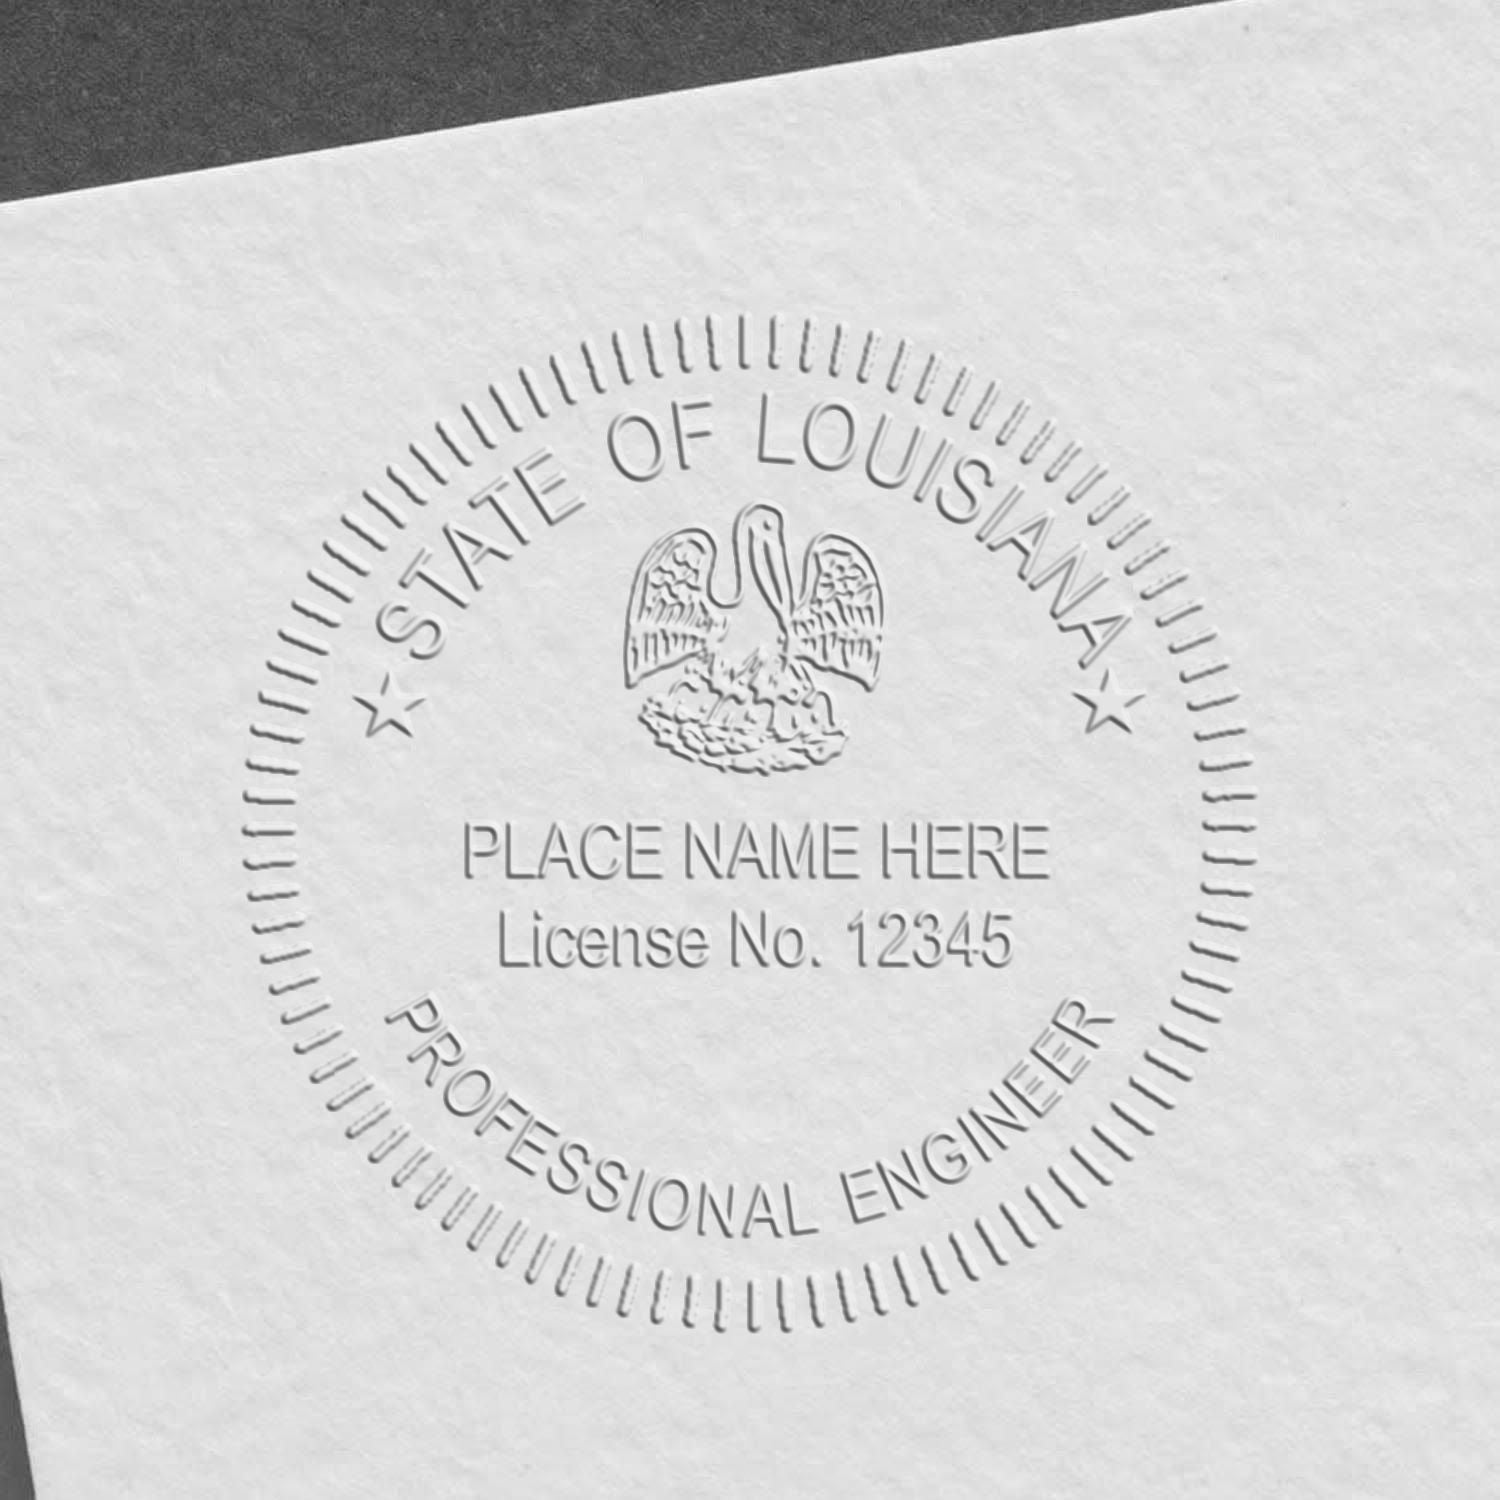 A photograph of the Hybrid Louisiana Engineer Seal stamp impression reveals a vivid, professional image of the on paper.